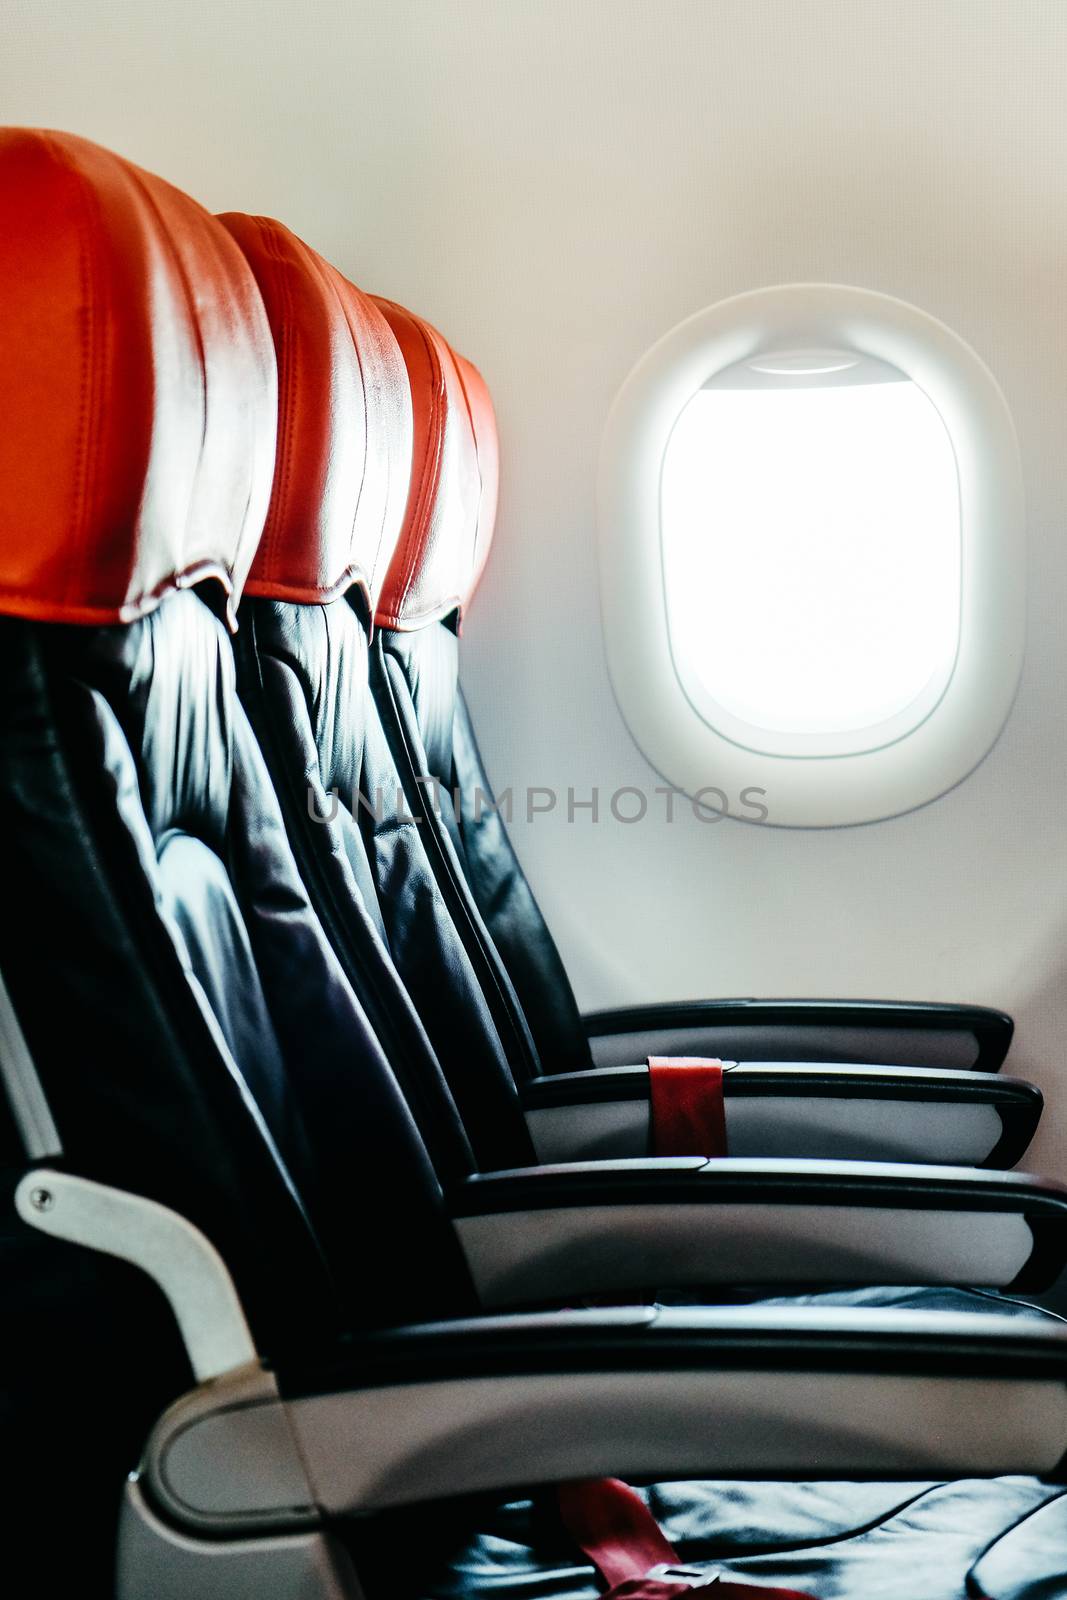 Seats in economy class section of airplane